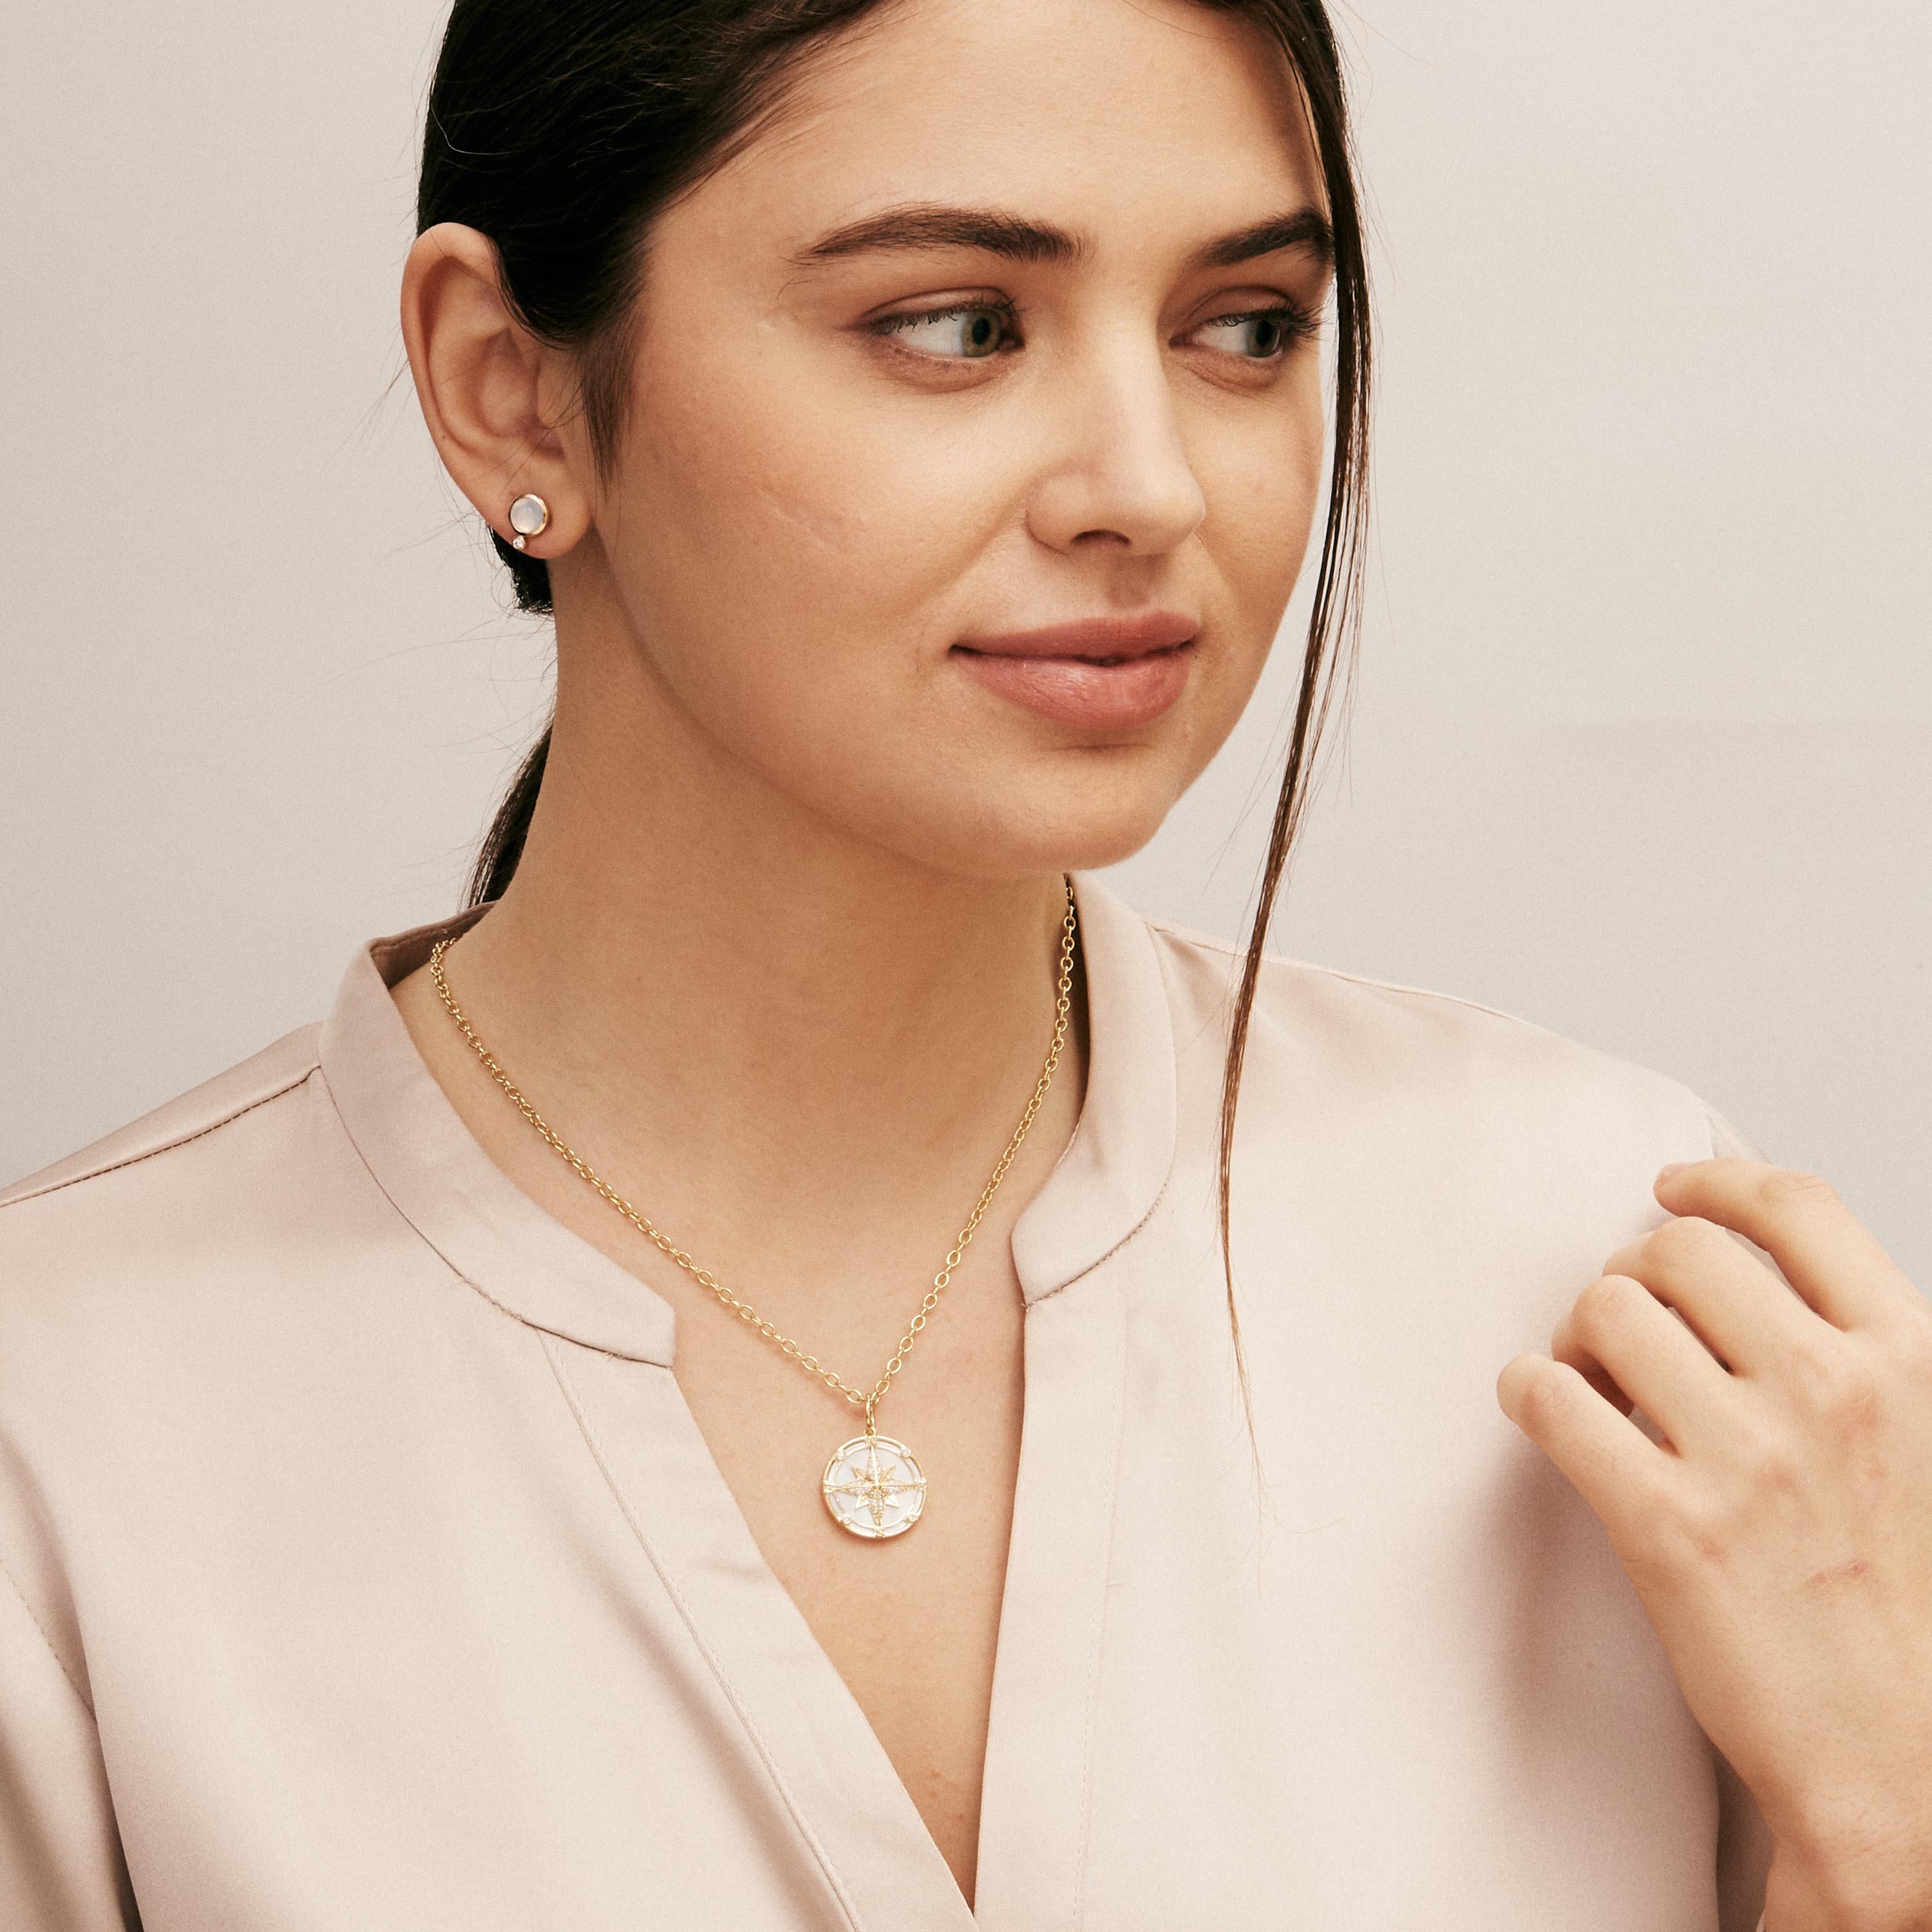 Created in 18 karat yellow gold
Mother of pearl 4.20 carats approx.
Diamonds 0.20 carat approx.
Chain sold separately 
Limited edition

Handcrafted from 18 karat yellow gold, this luxurious pendant features an intricately carved mother of pearl